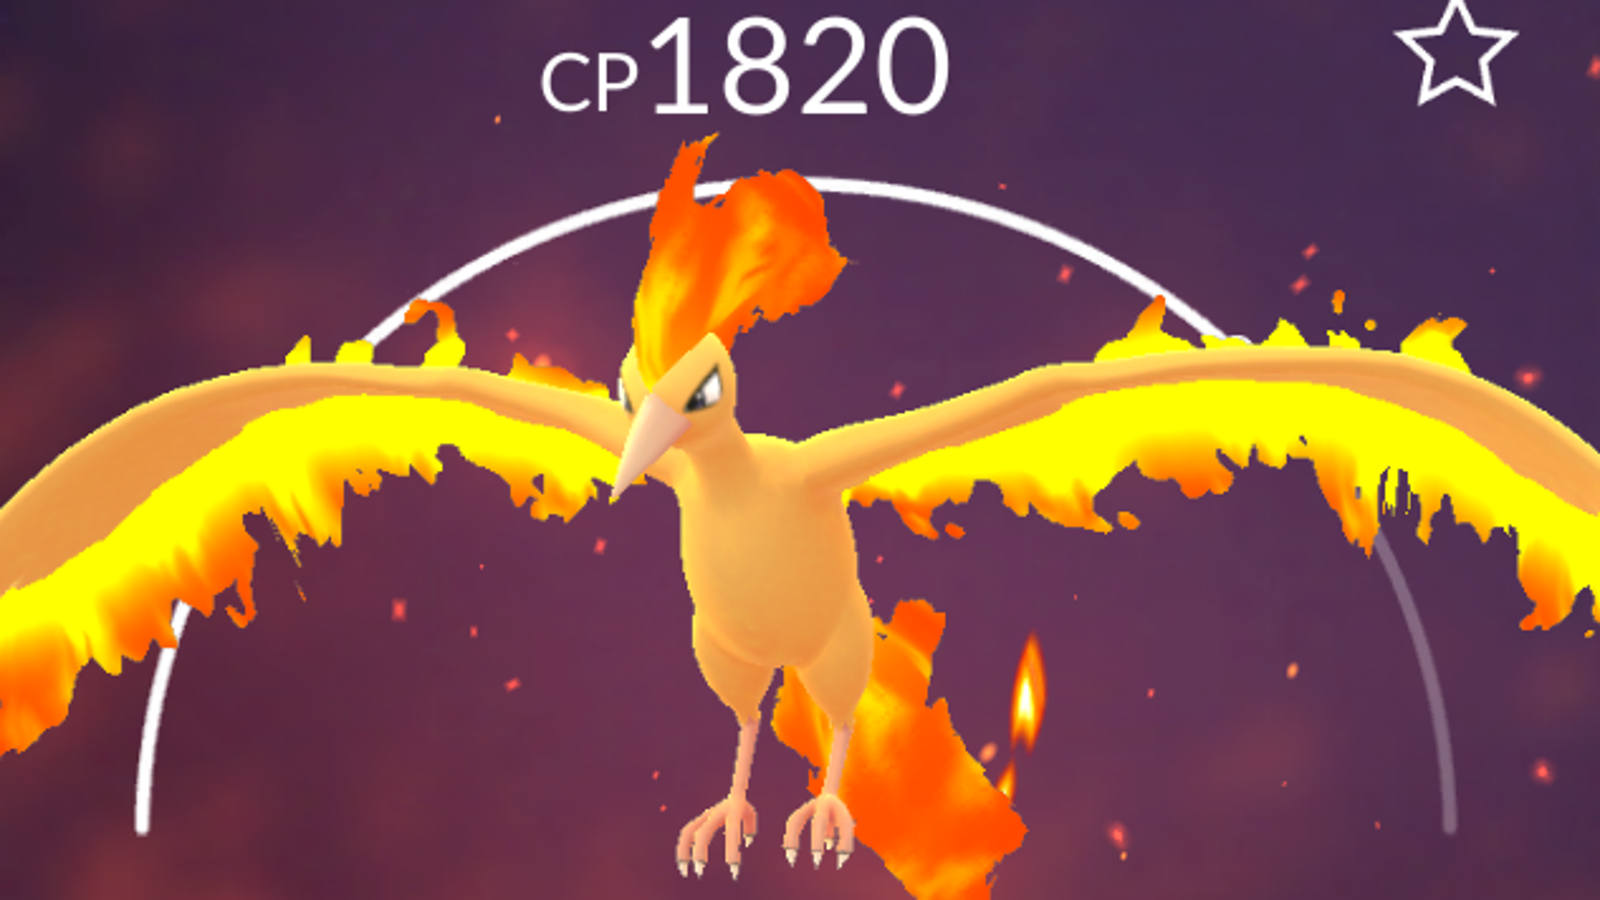 Pokemon Go Adds Shiny Moltres for Special Event